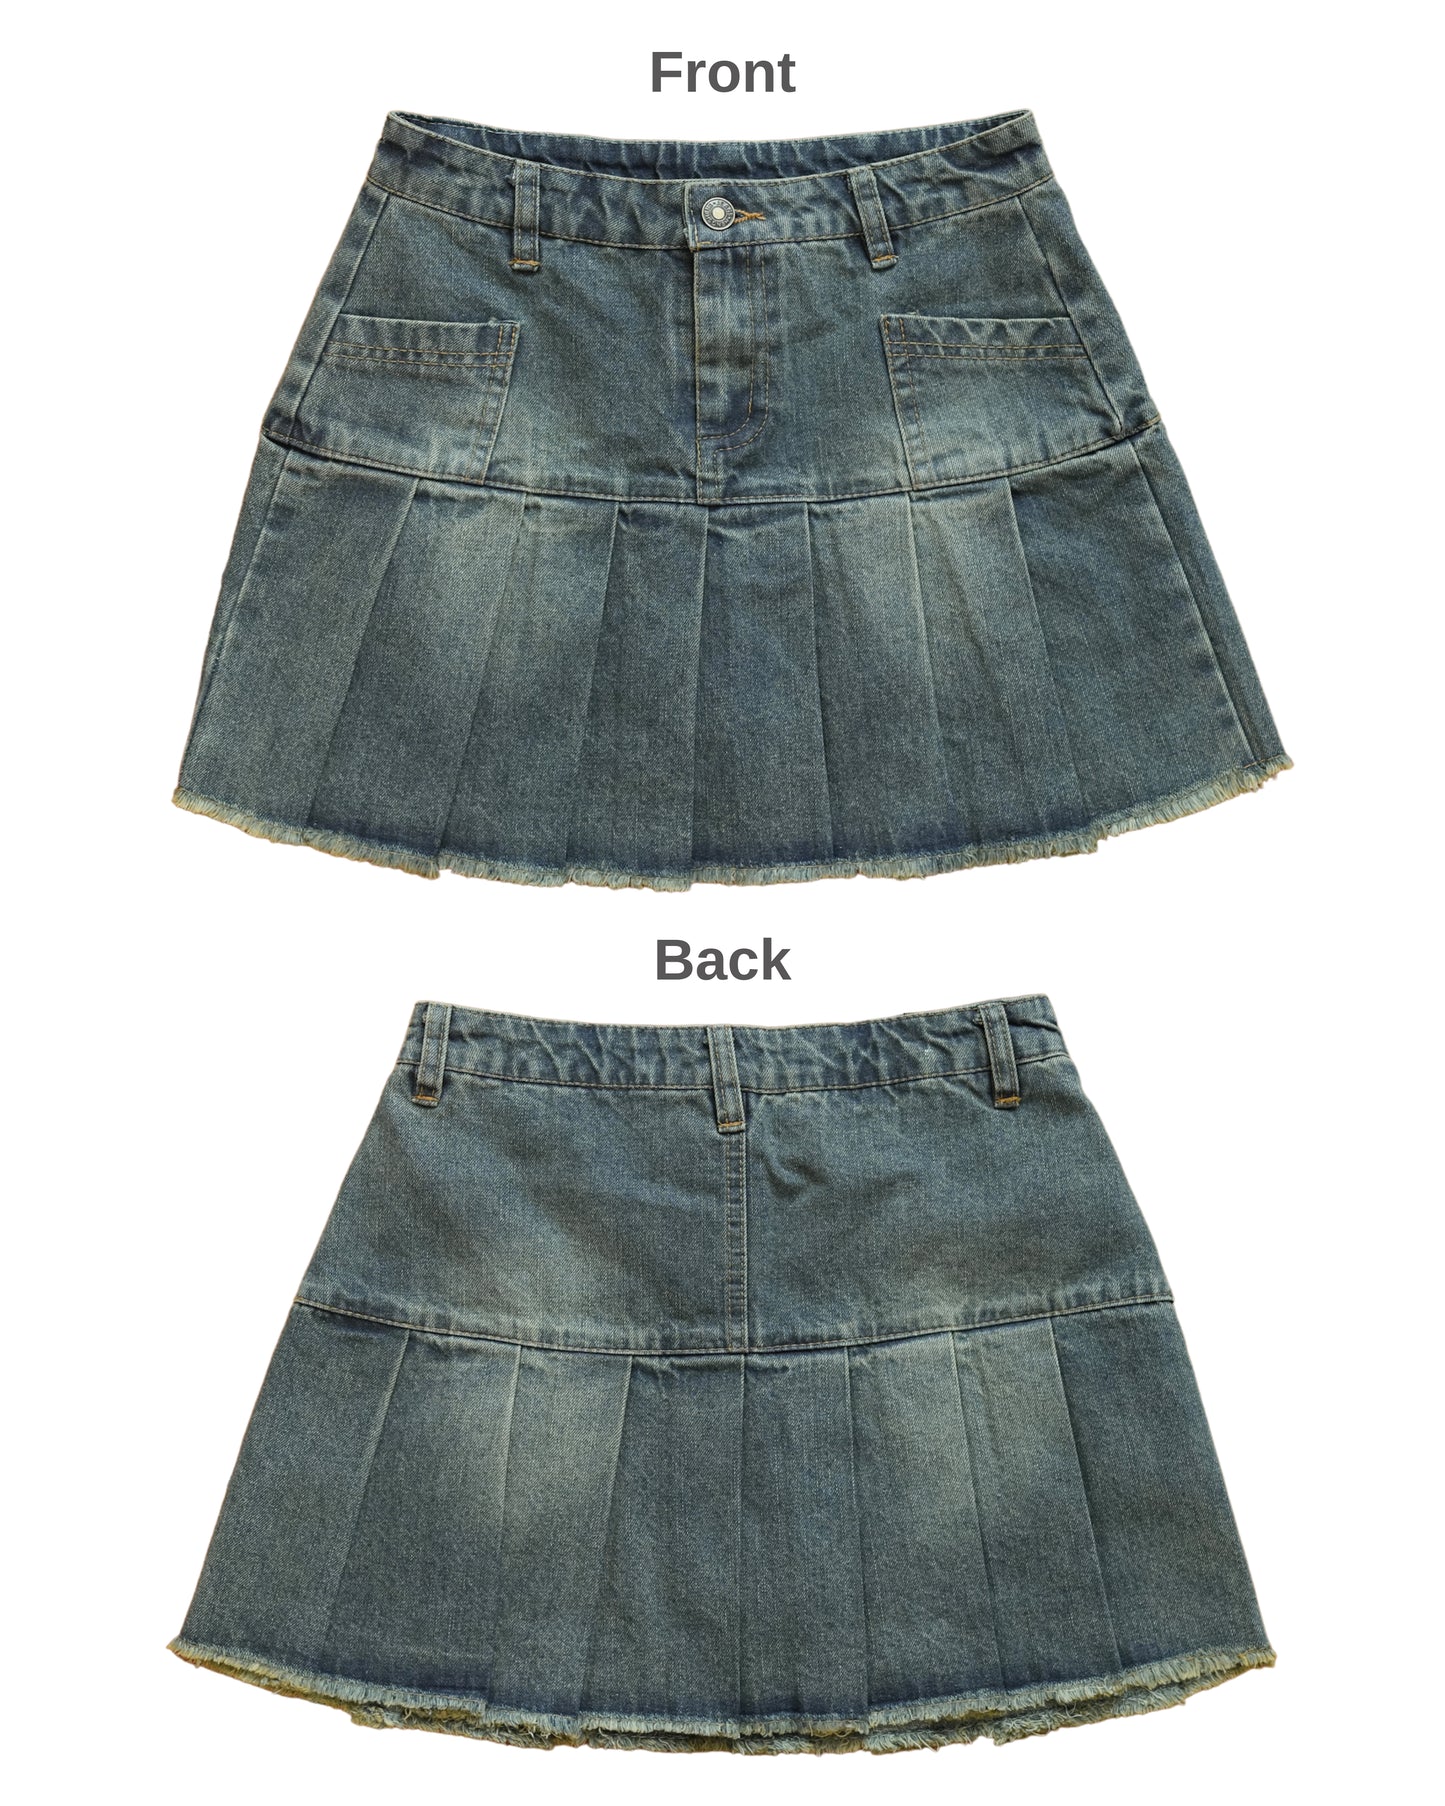 Old washed denim pleated skirt